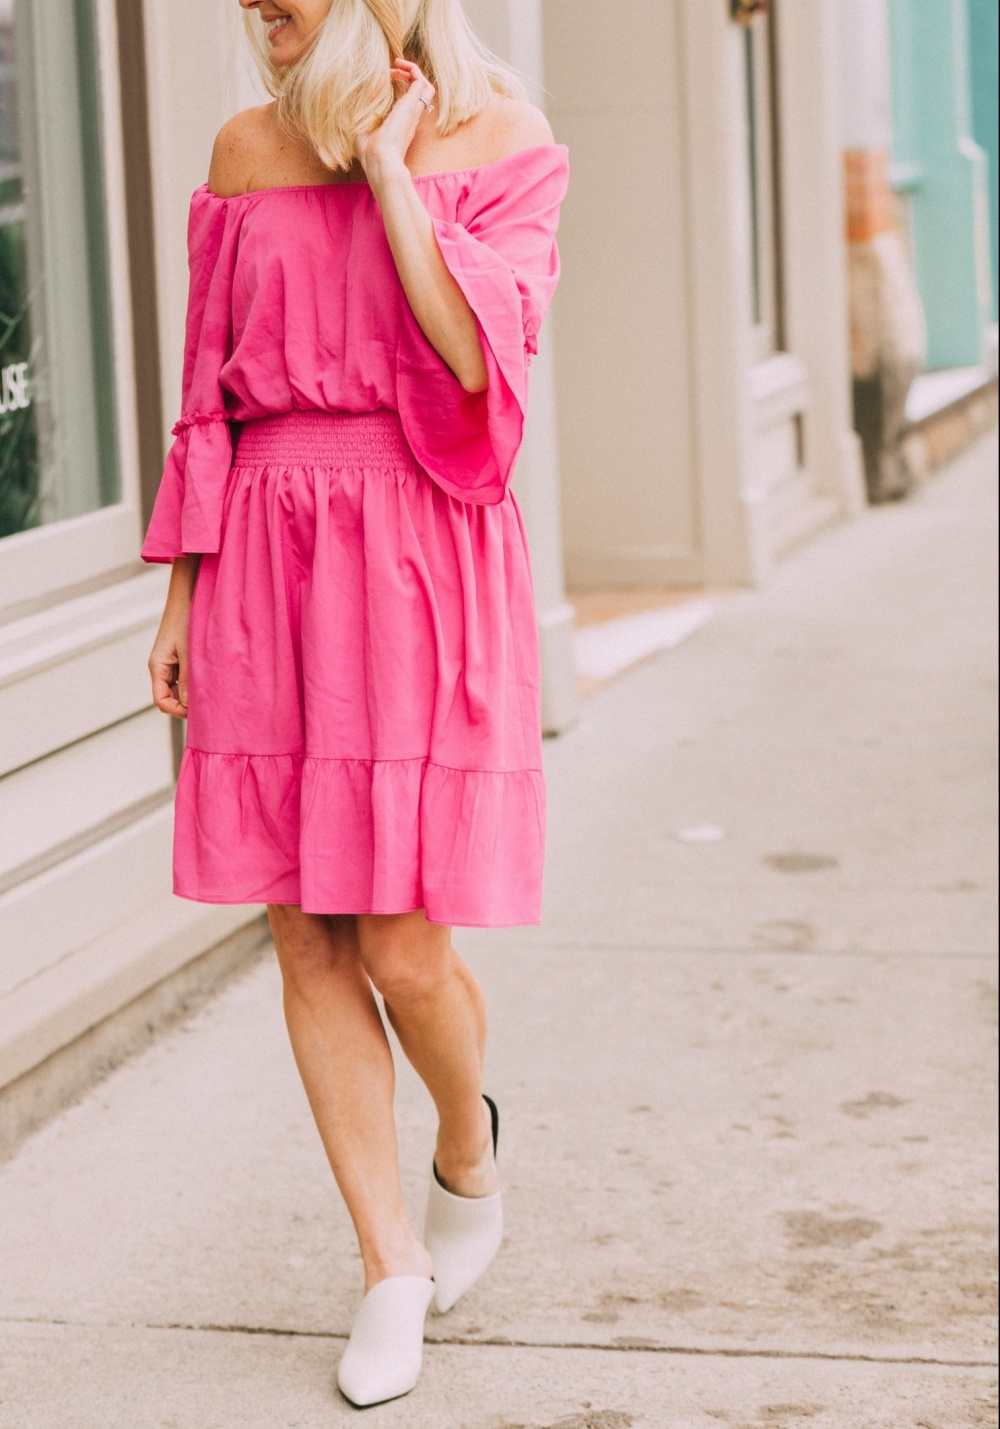 Spring Fashion, bright pink Le Gali off the shoulder dress with Via Spiga white mules from Bloomingdale's worn by fashion blogger Erin Busbee of BusbeeStyle.com in Telluride, CO